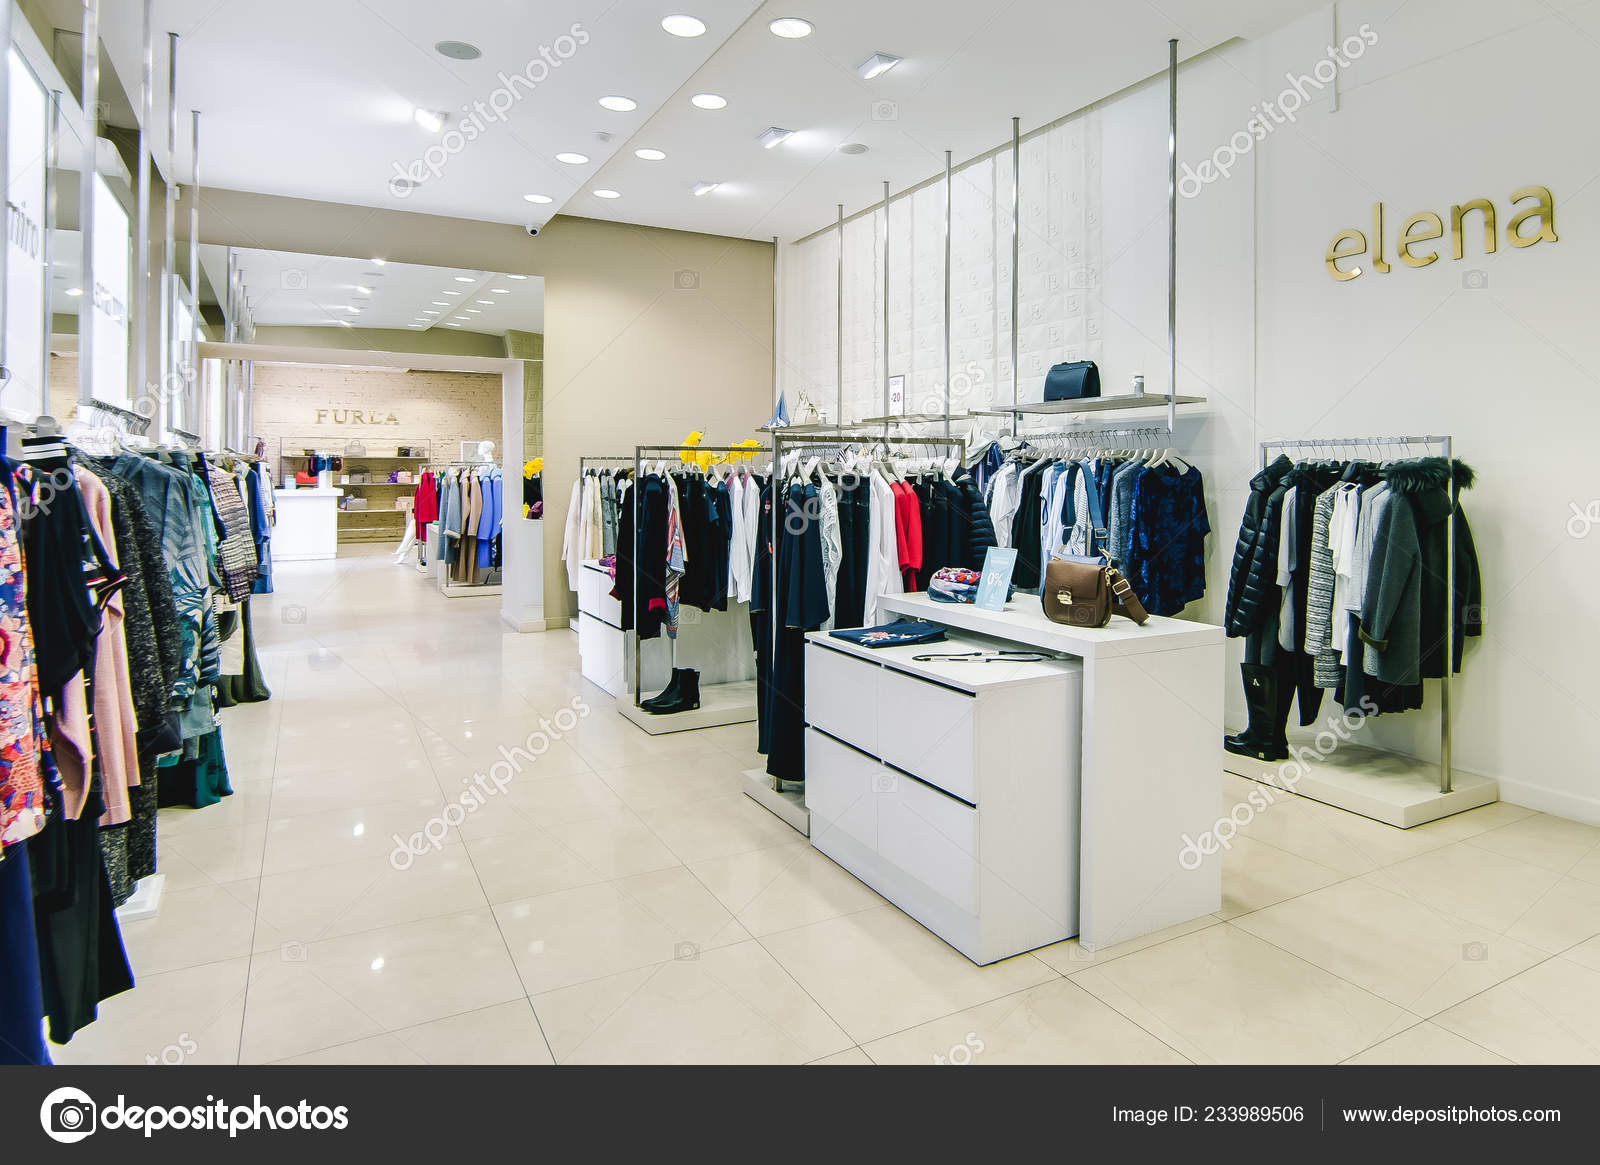 Russia Novosibirsk April 2018 Interior Women's Clothing Accessories Store Boutique – Stock Editorial Photo Zhyk1988 #233989506